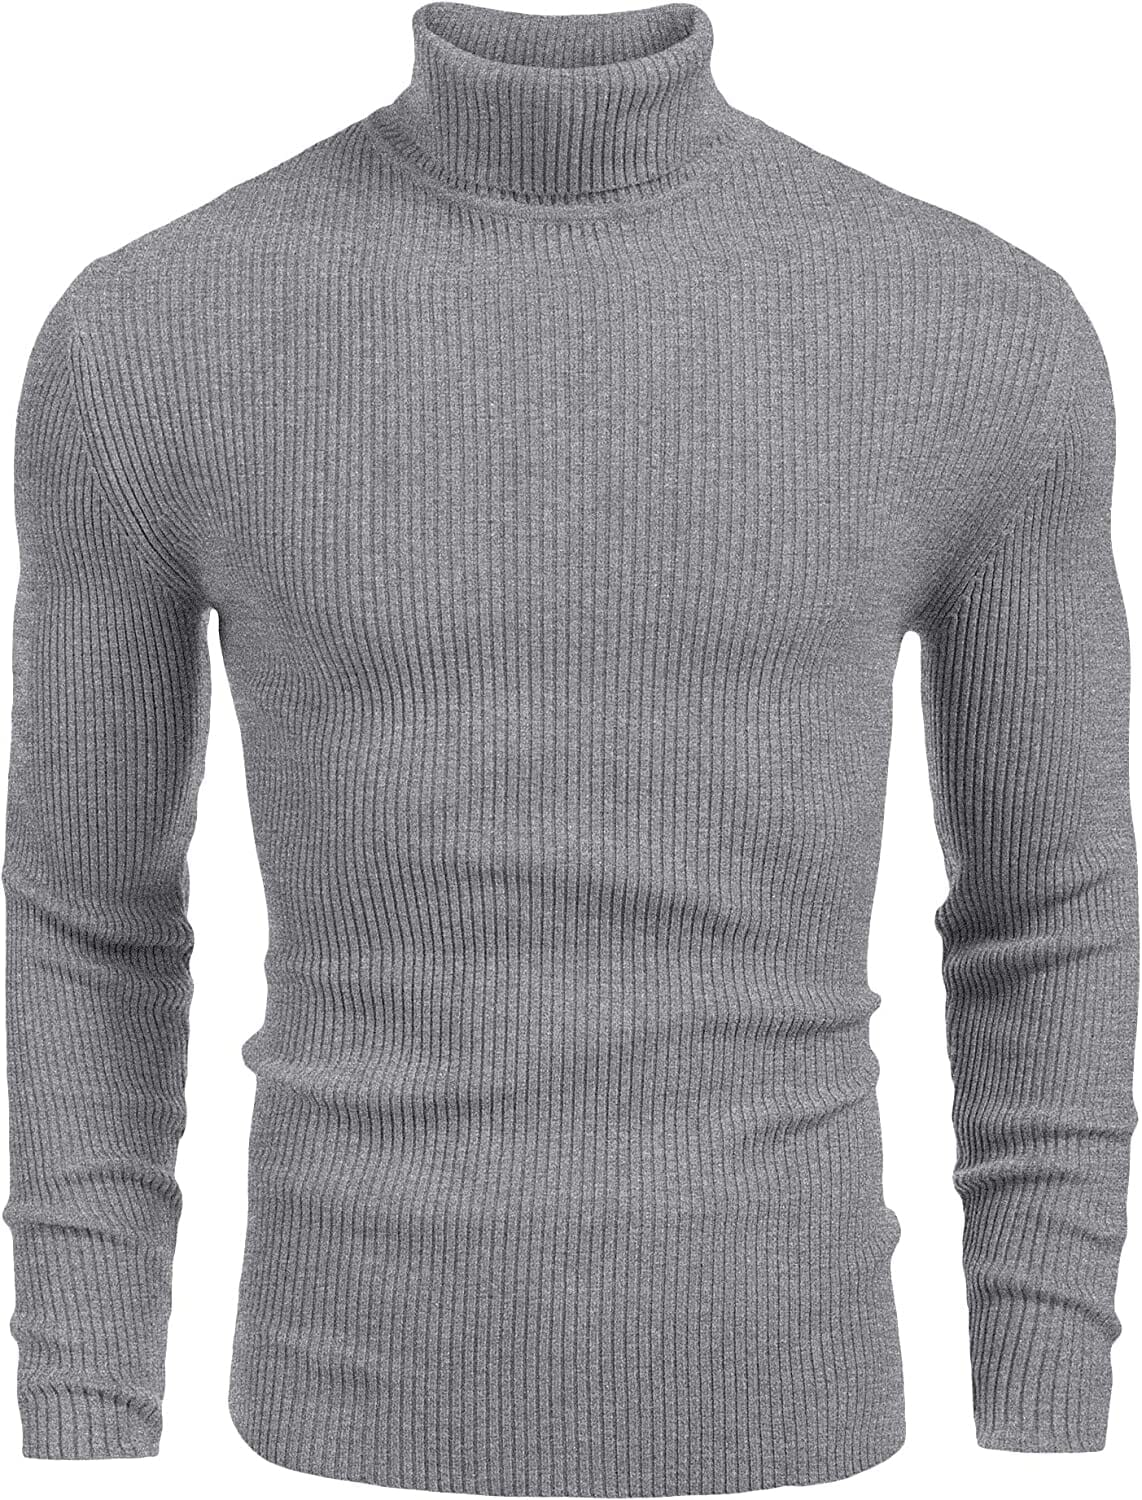 Ribbed Slim Fit Knitted Pullover Turtleneck Sweater (US Only) Sweaters COOFANDY Store Medium Grey S 